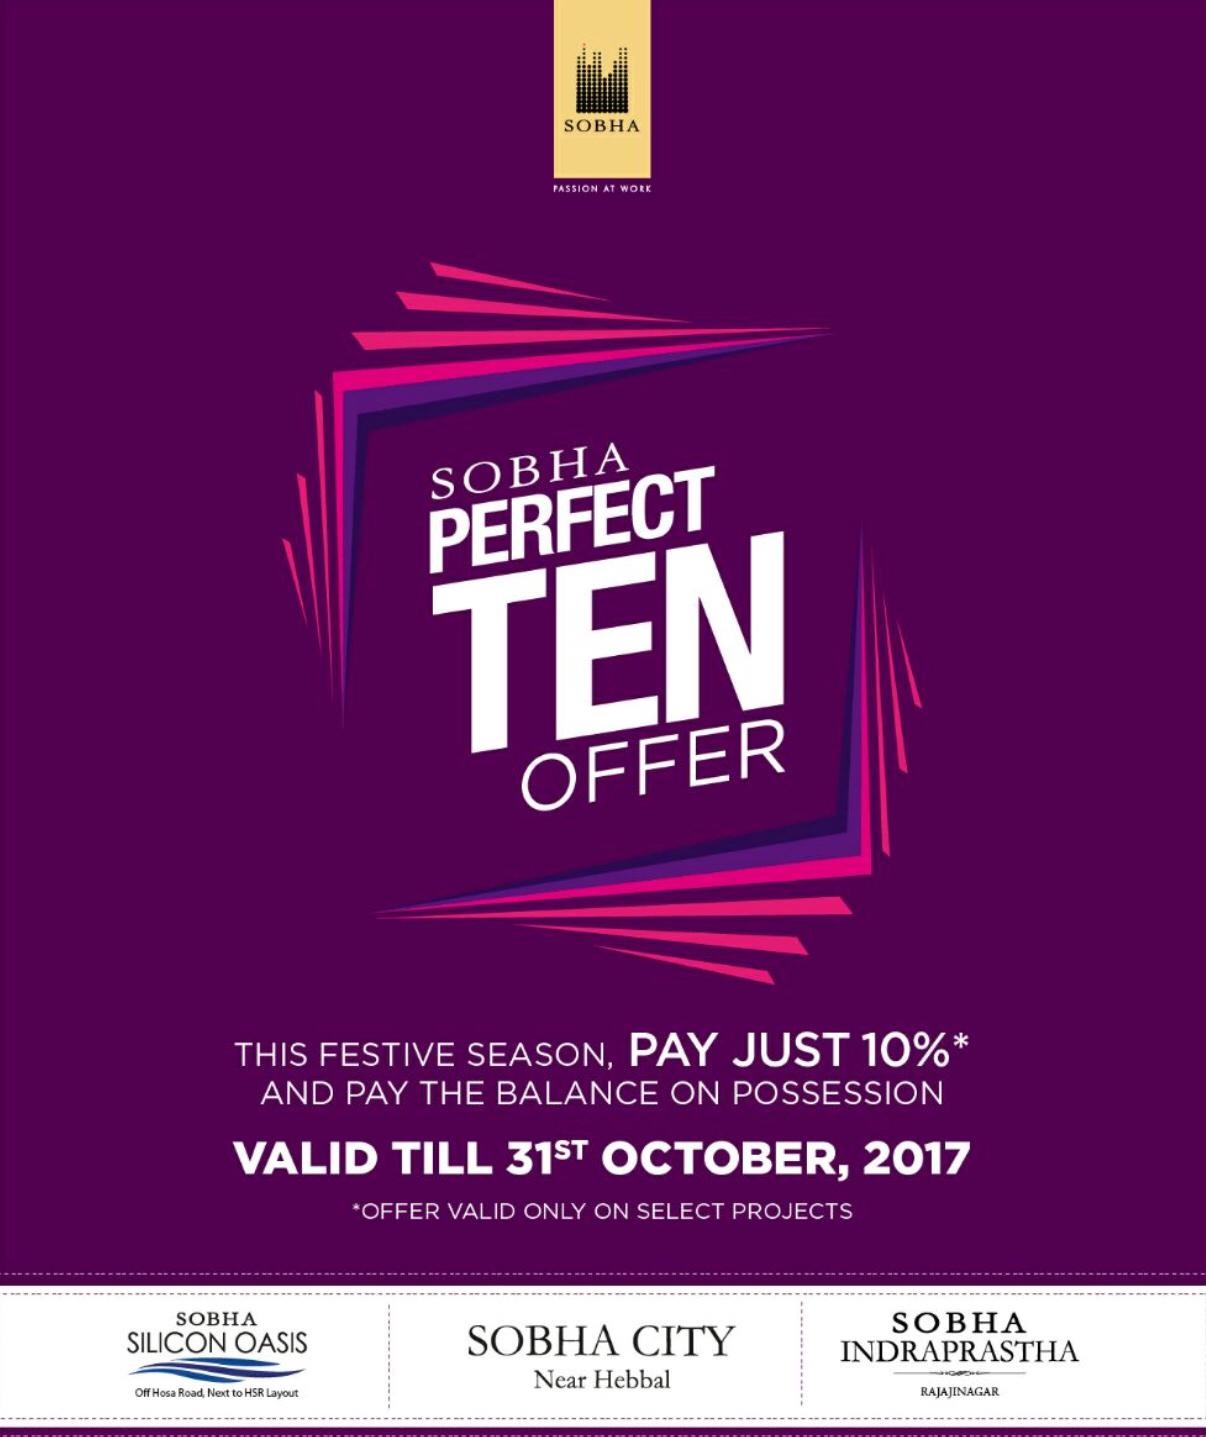 Sobha perfect teen offer during this festive season in Bangalore Update